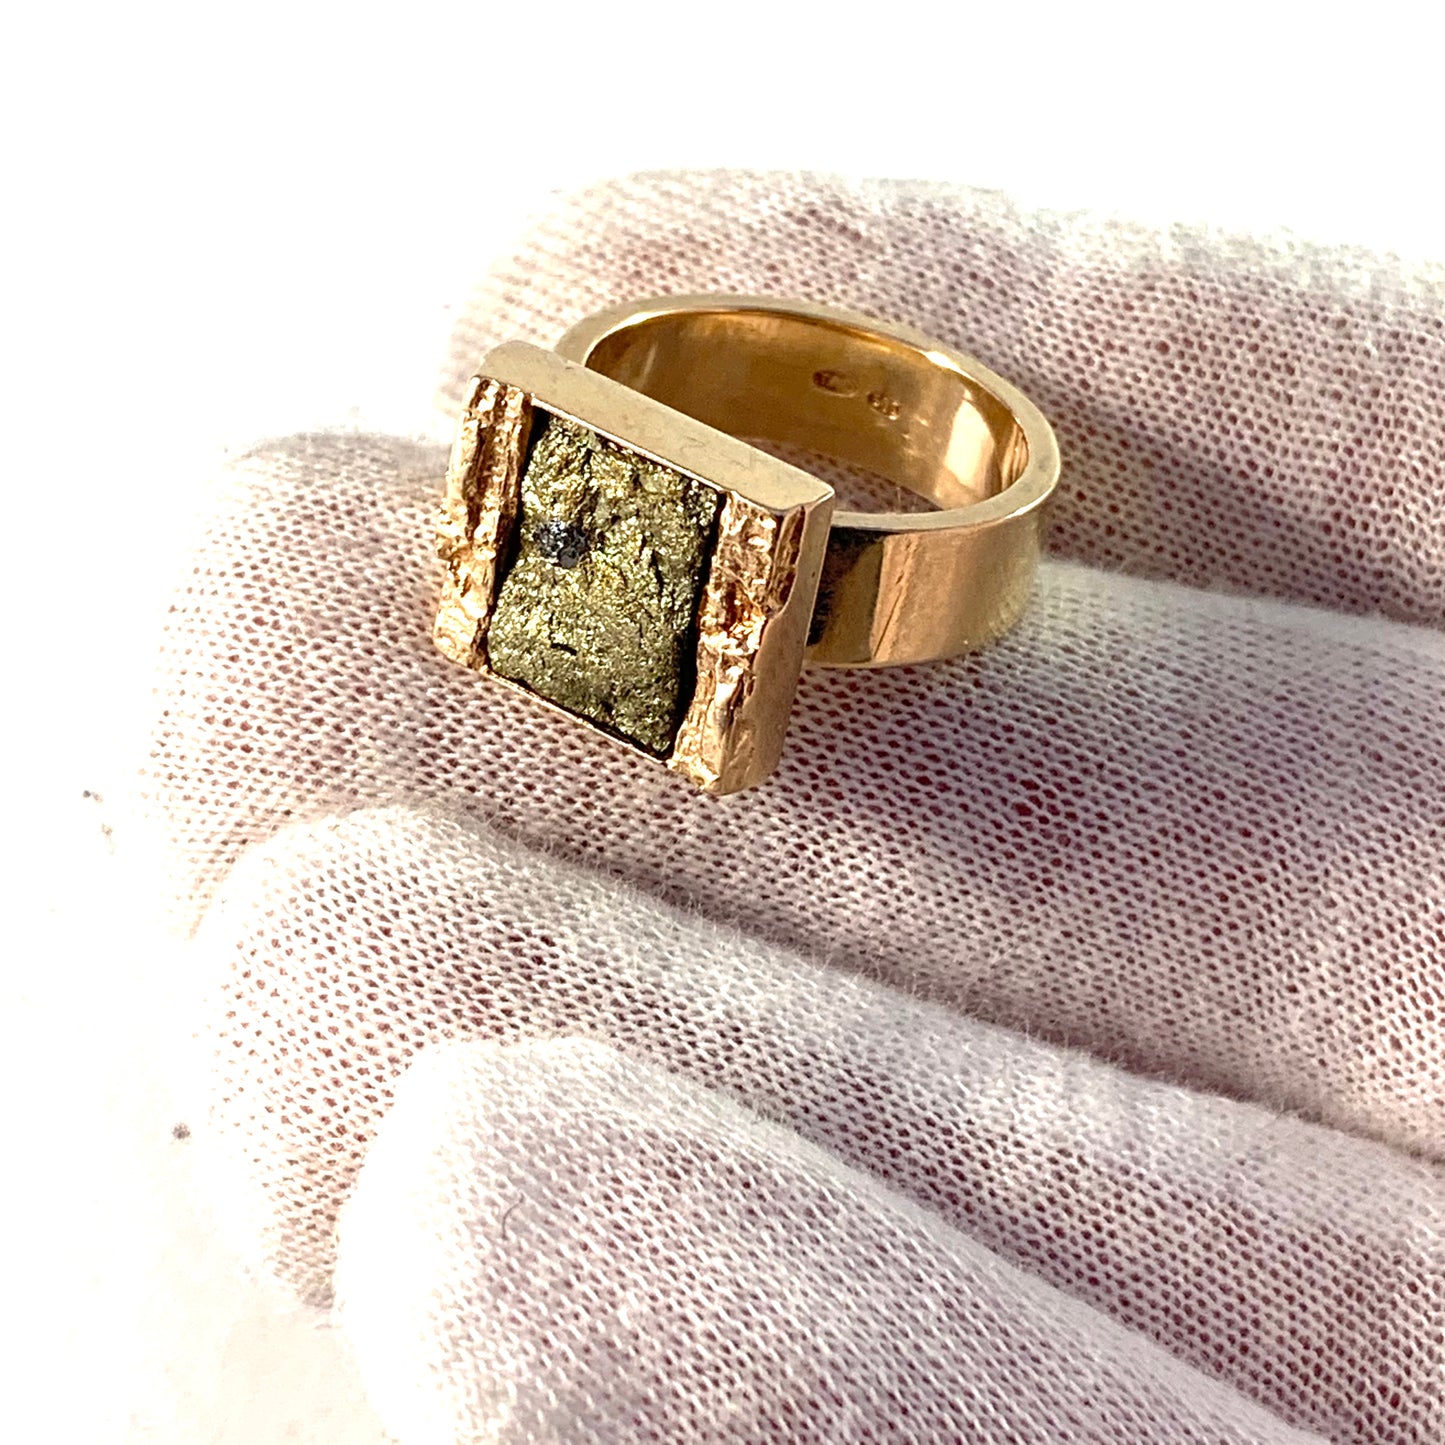 Finland Vintage Chunky 14k Gold Copper Ore Unisex Ring.